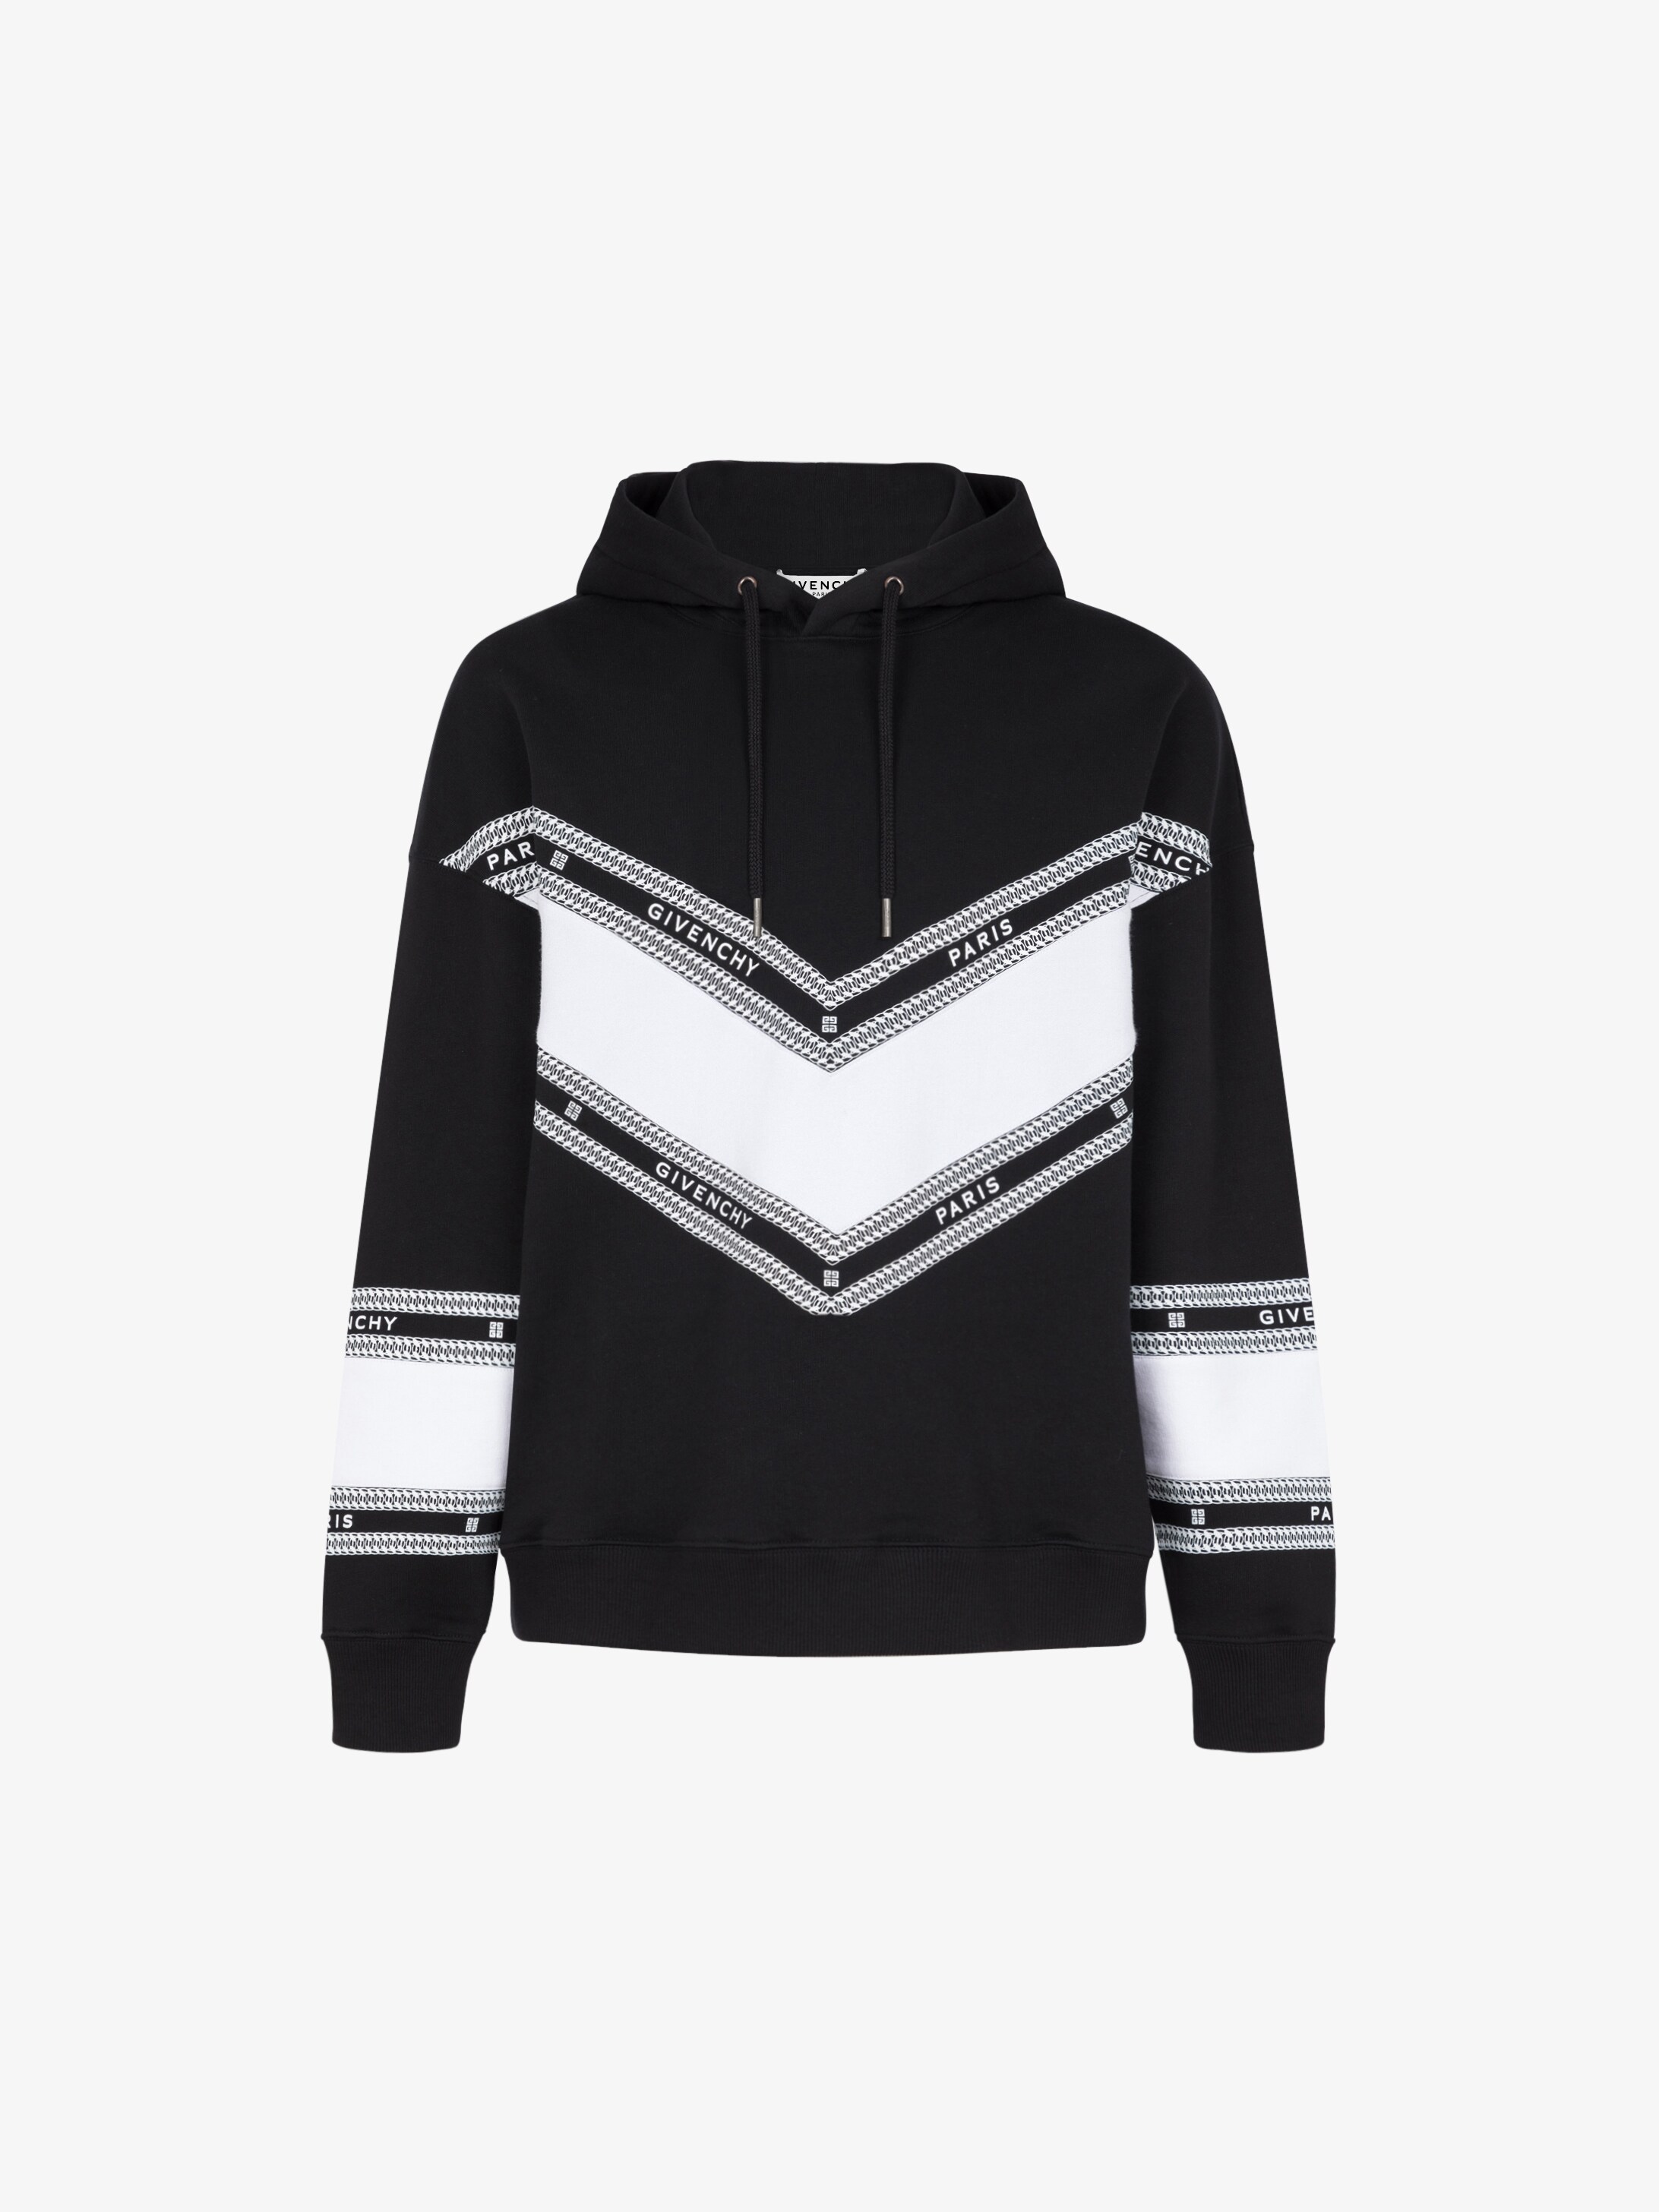 GIVENCHY chain hoodie | GIVENCHY Paris